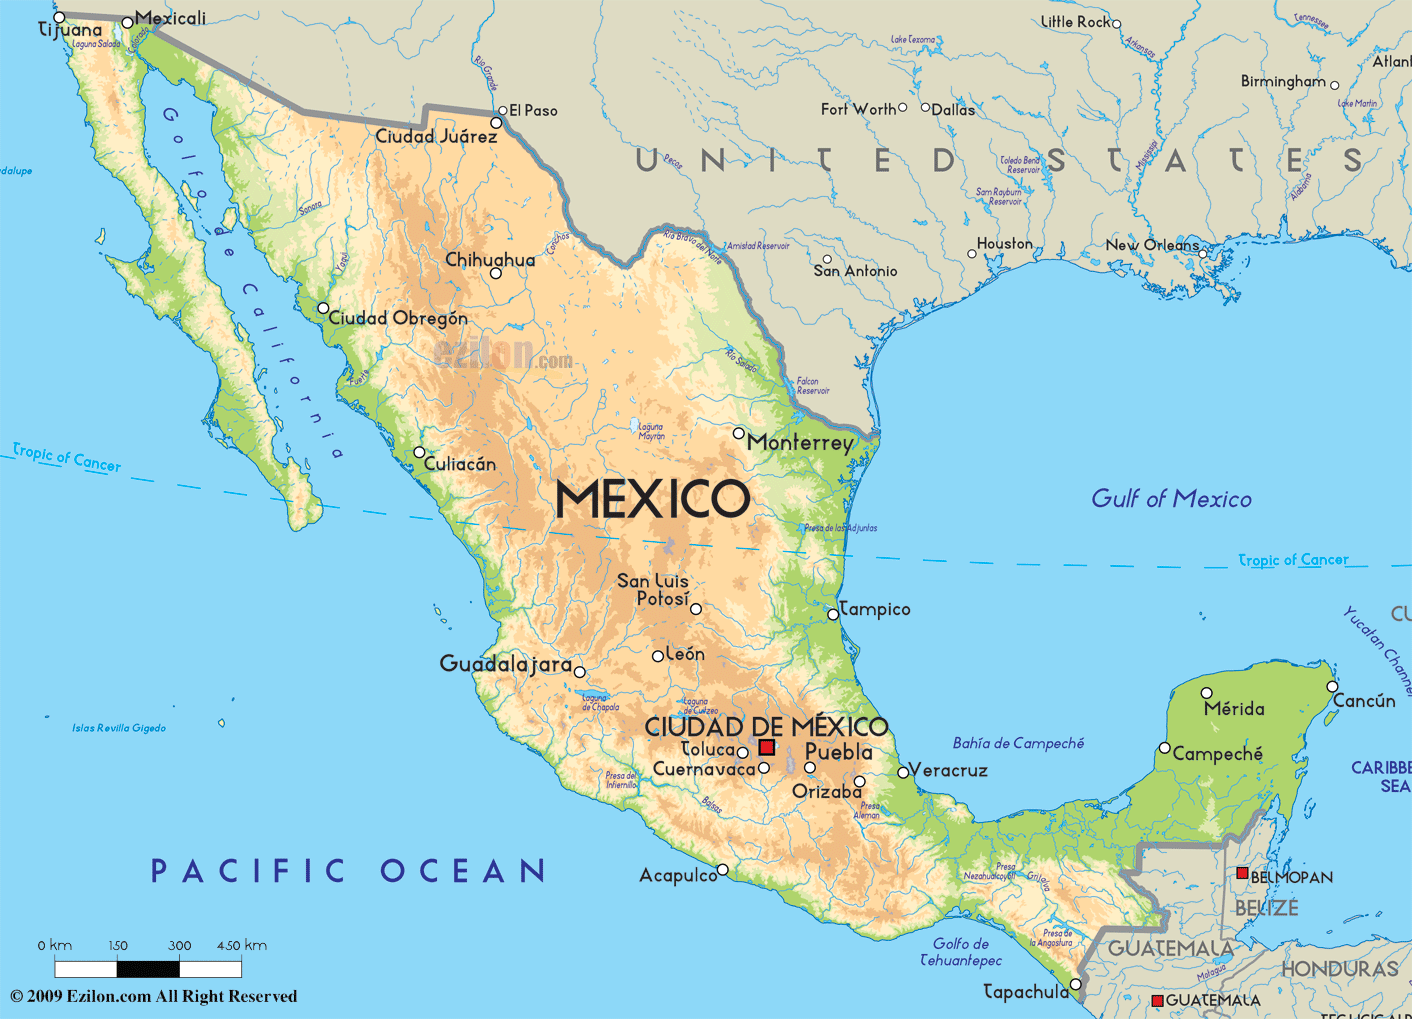 Geography & Gender: Fertility Rate in Mexico